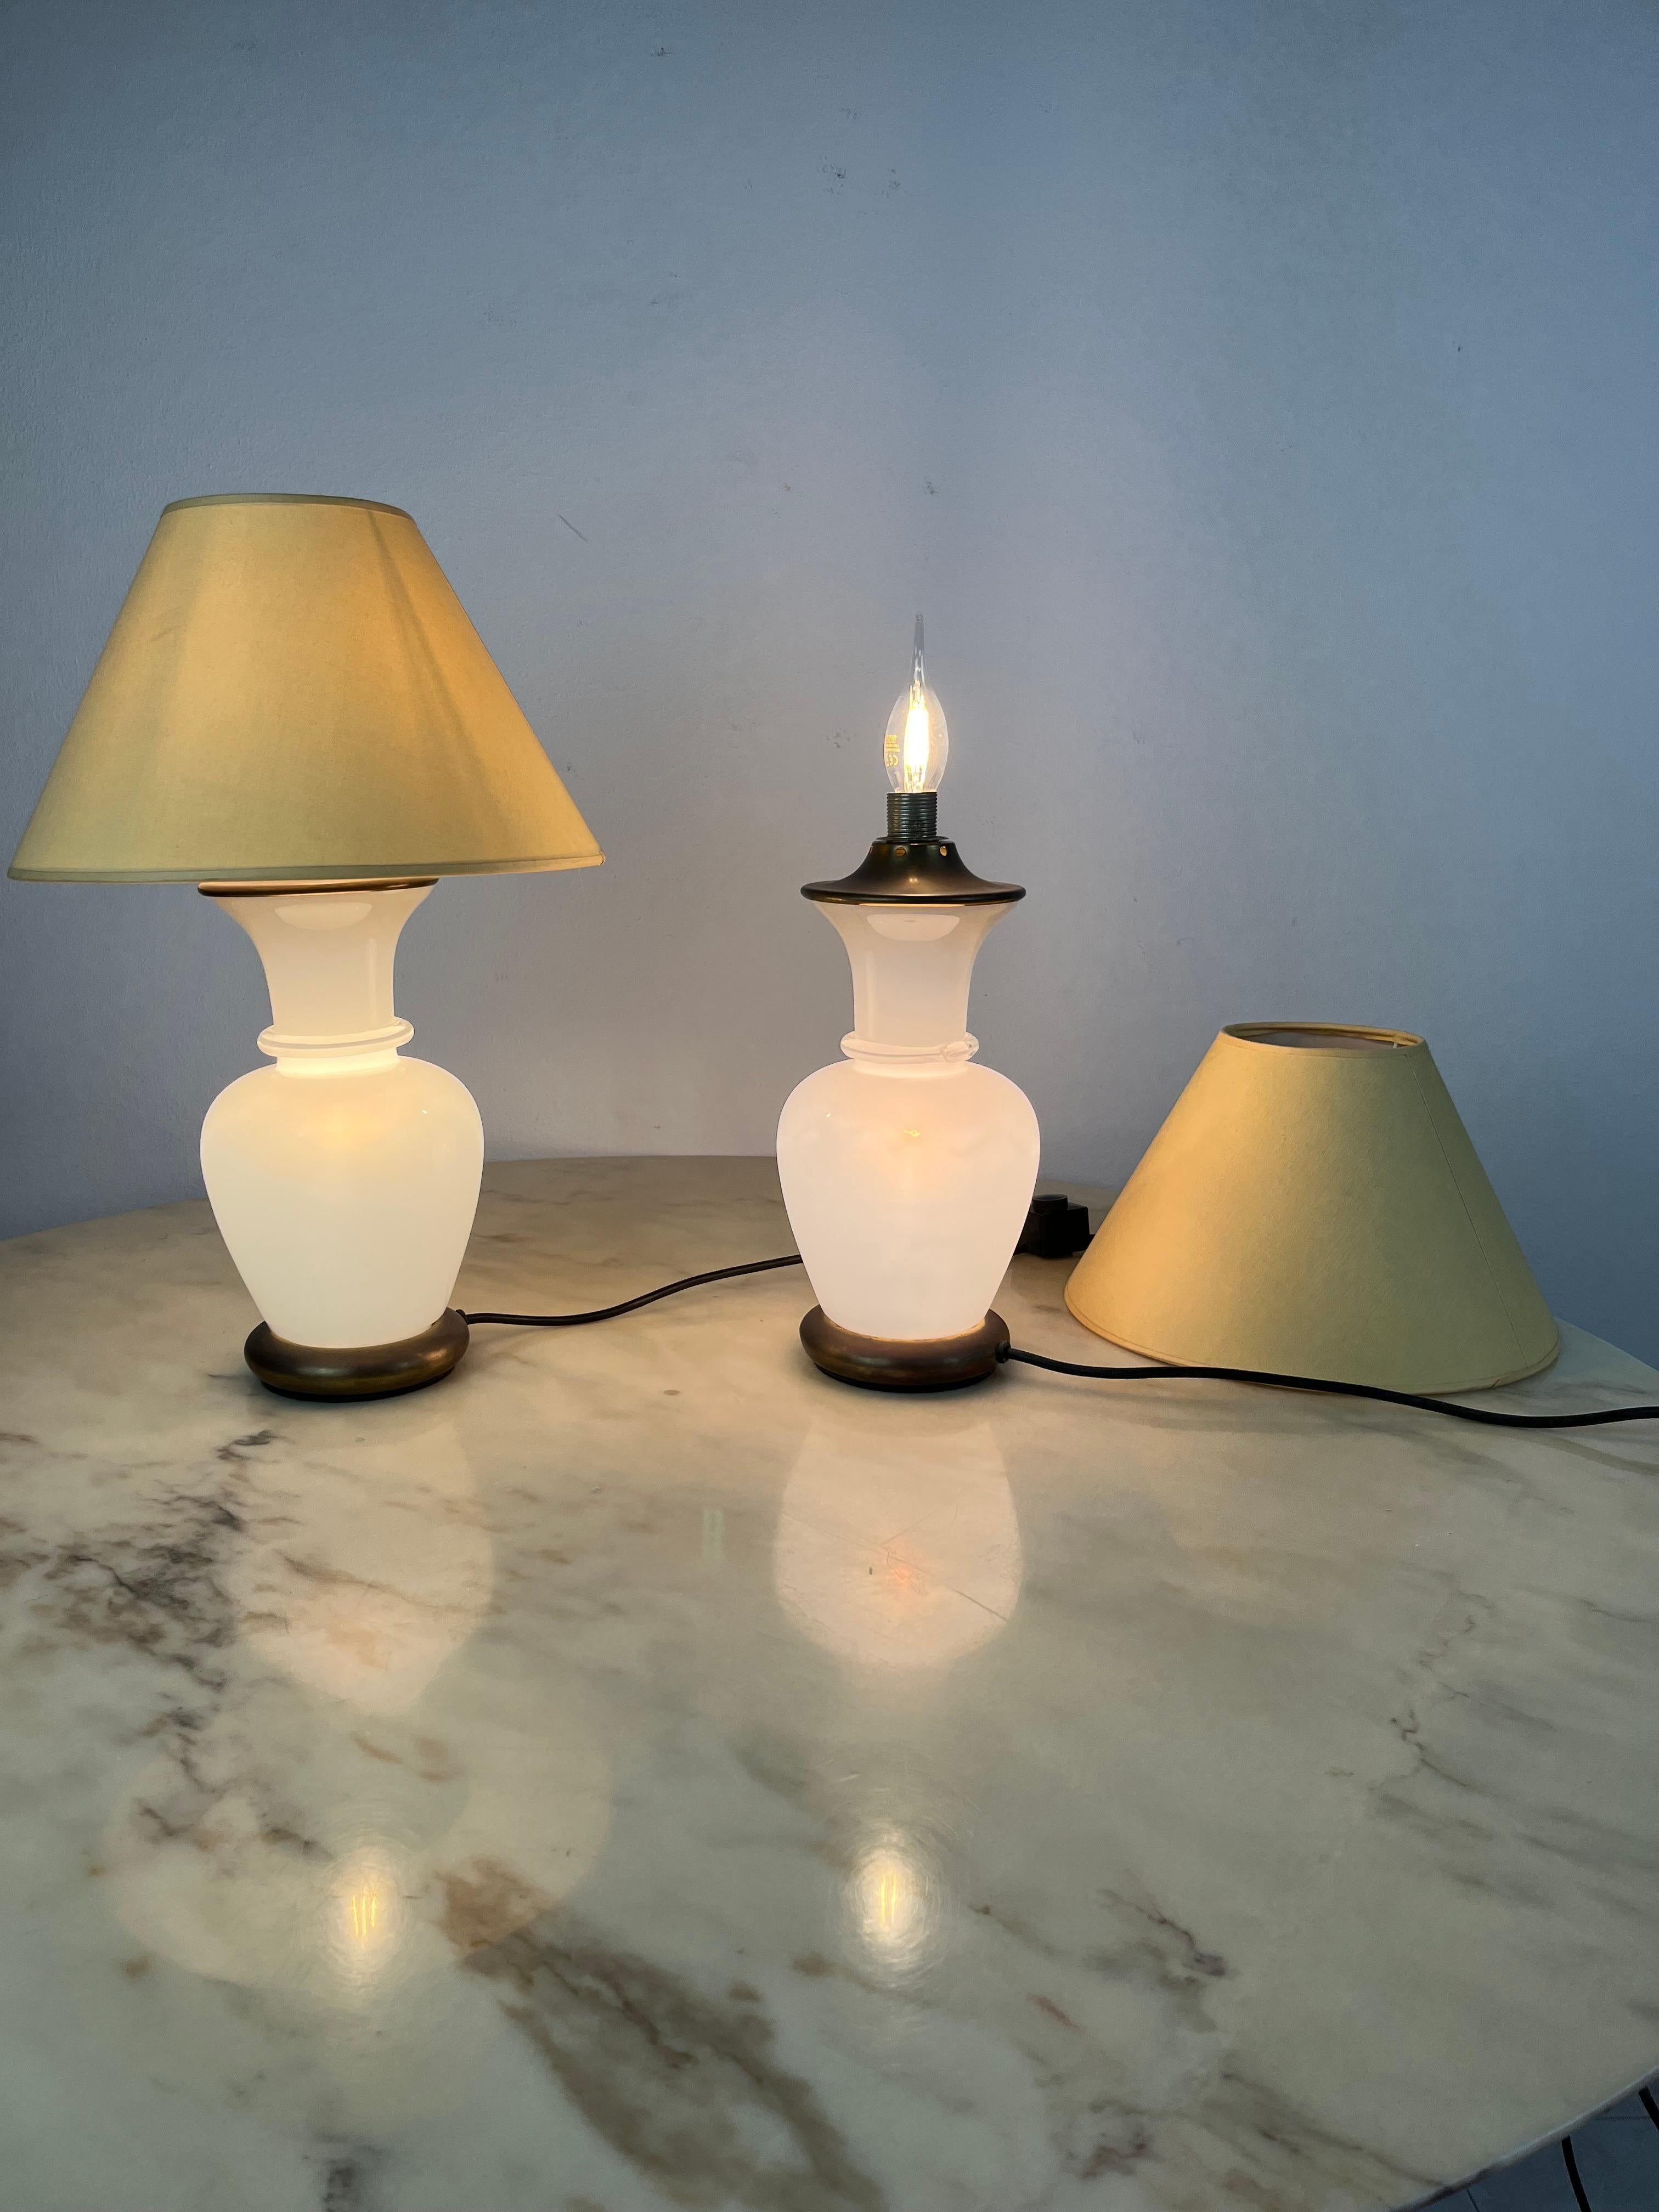 Set of 3 Murano Glass and Brass Table Lamps, F. Fabbian, Italy, 1970s For Sale 5